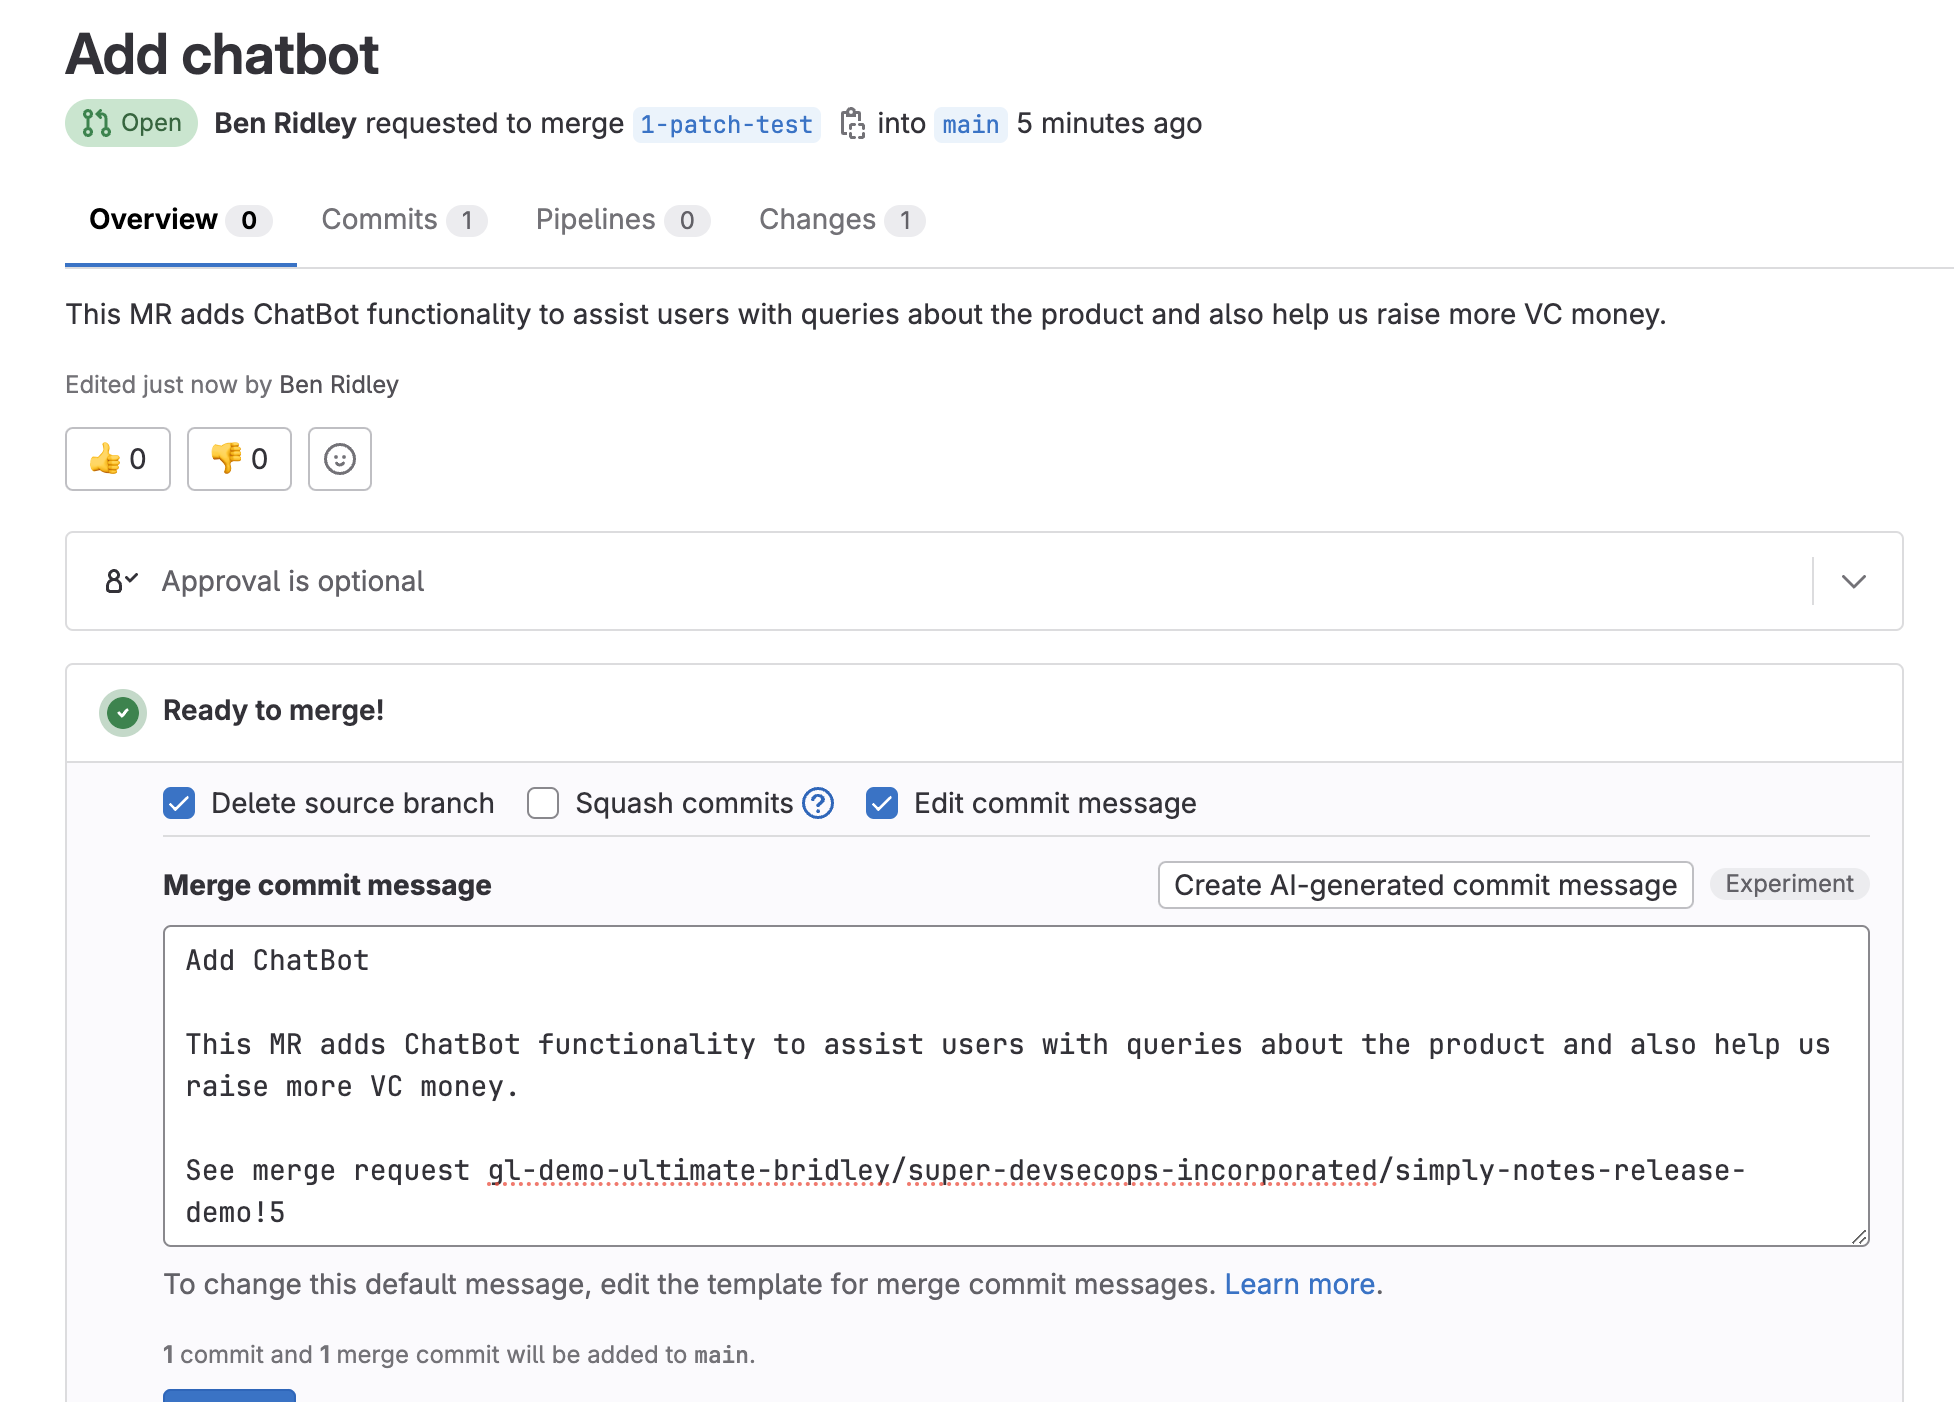 A screenshot of the GitLab UI showing a merge request to add new functionality